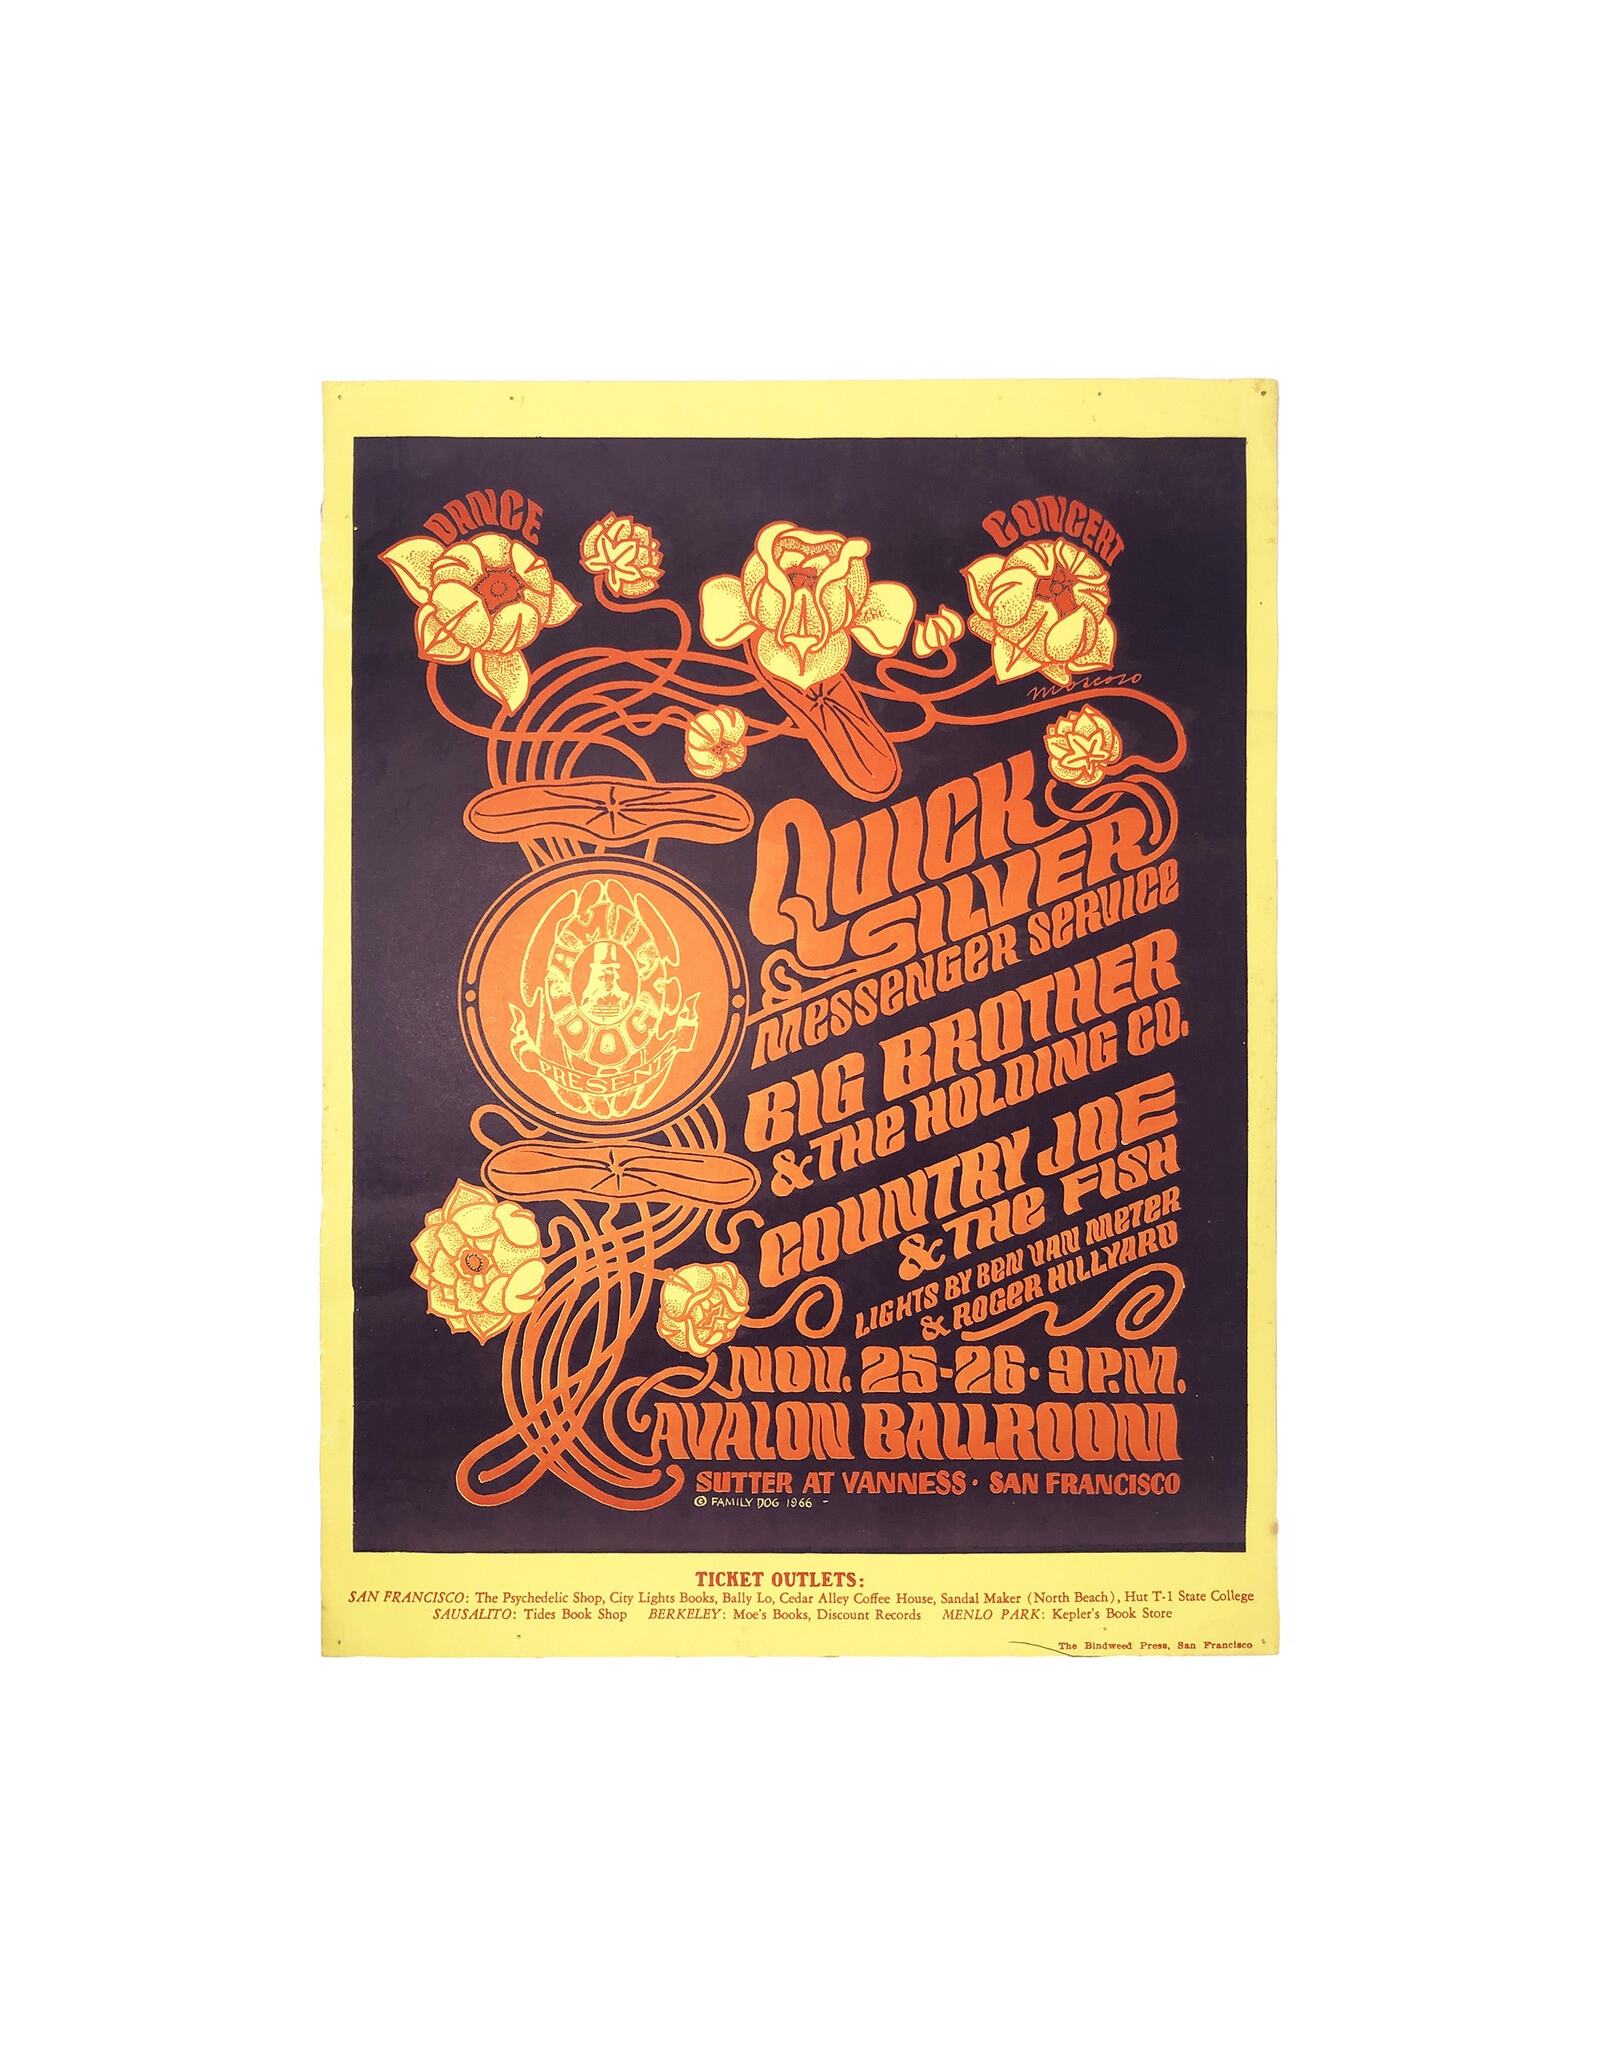 Family Dog Productions Quicksilver Messenger Service Big Brother & the Holding Co. Country Joe & the Fish Avalon Ballroom Vintage Concert Poster No.36 November 1966